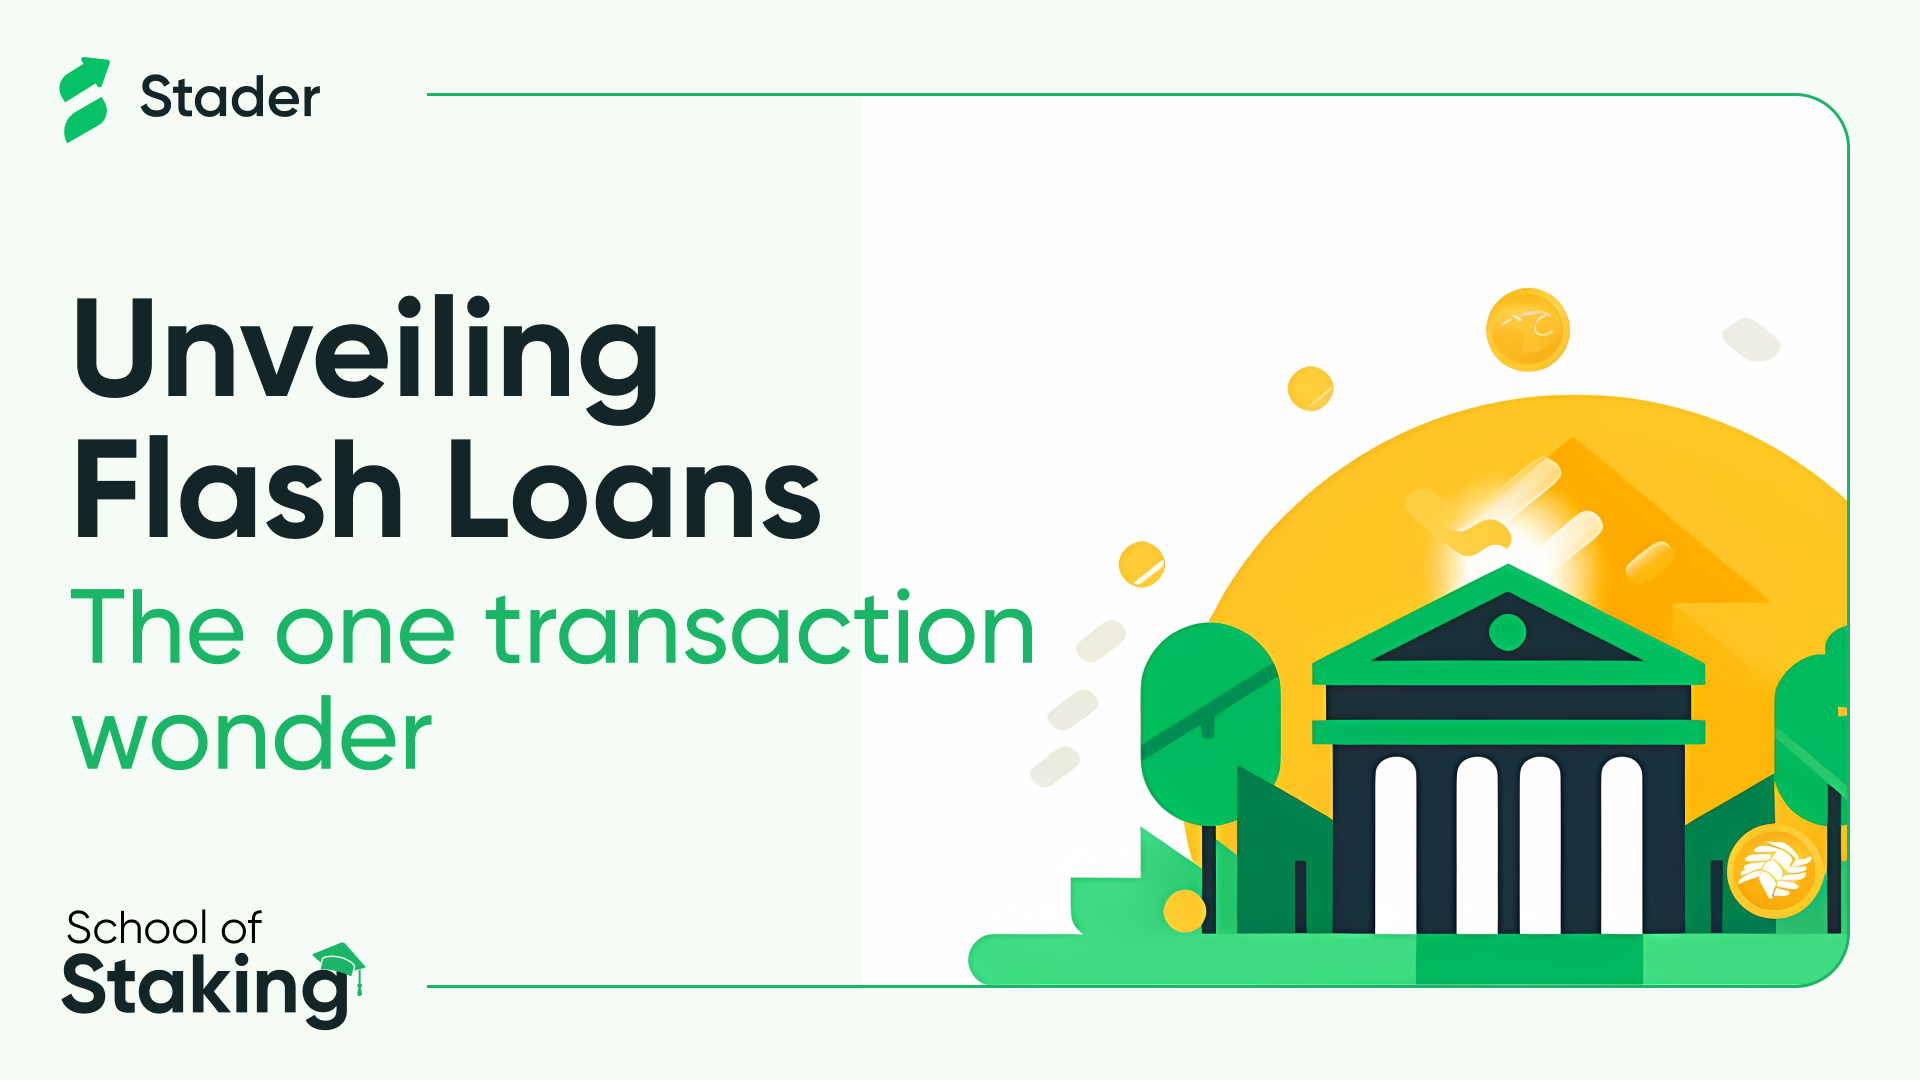 What is a flash loan?